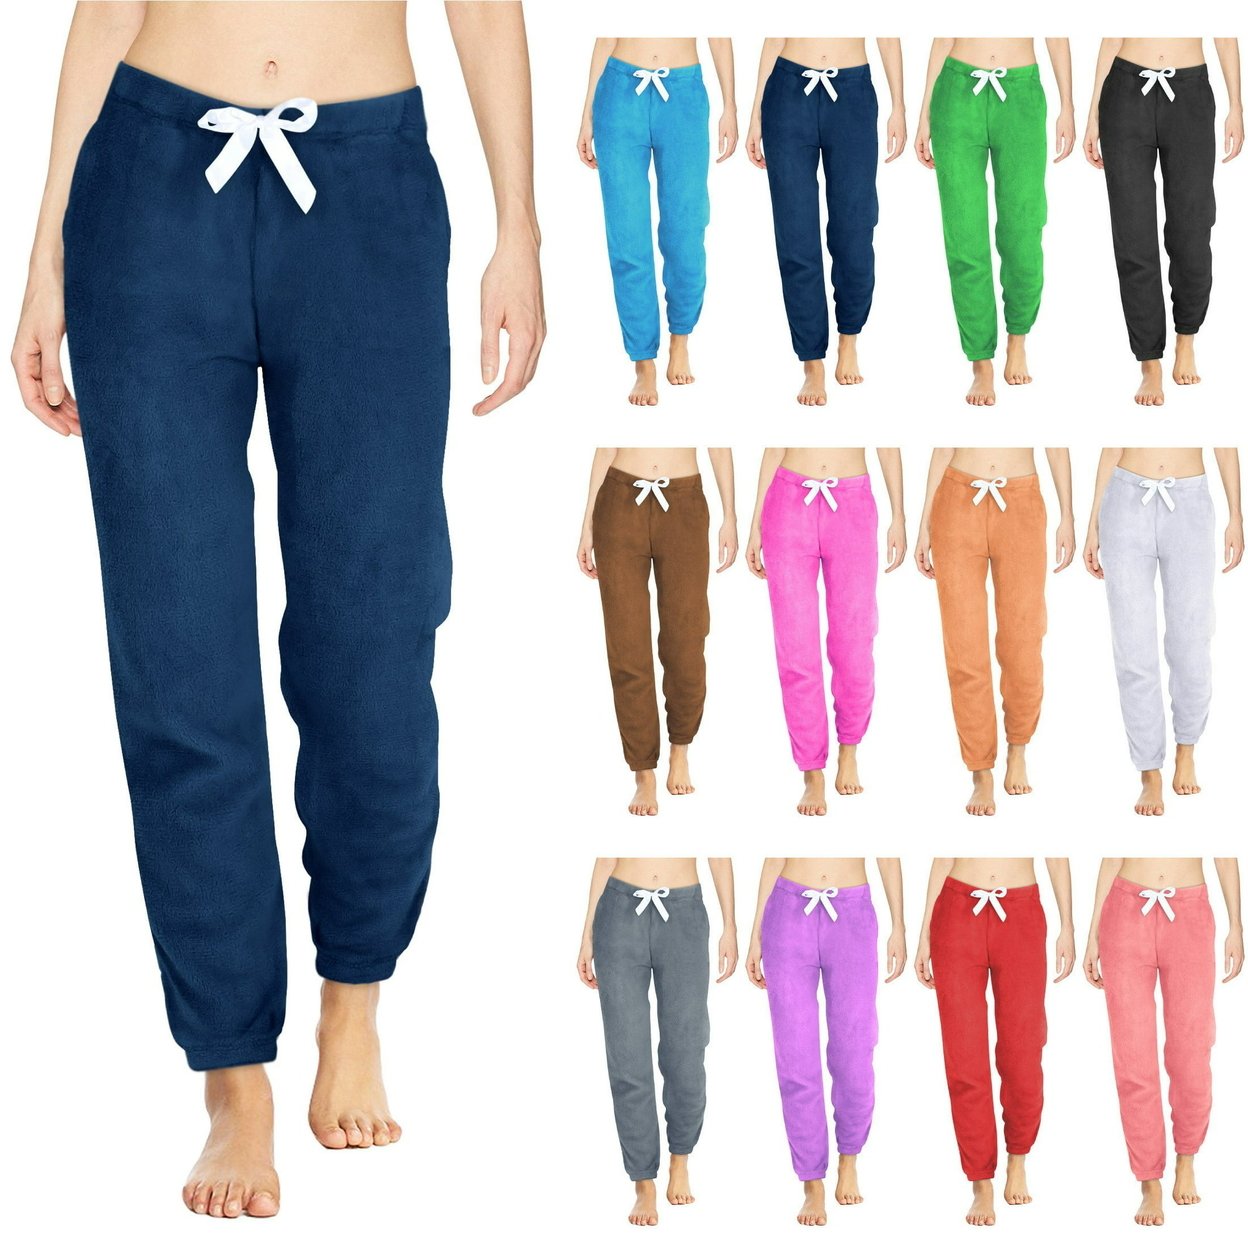 Multi-Pack: Women's Solid & Printed Ultra-Soft Comfy Stretch Micro-Fleece Pajama Lounge Pants - 1-pack, X-large, Shapes